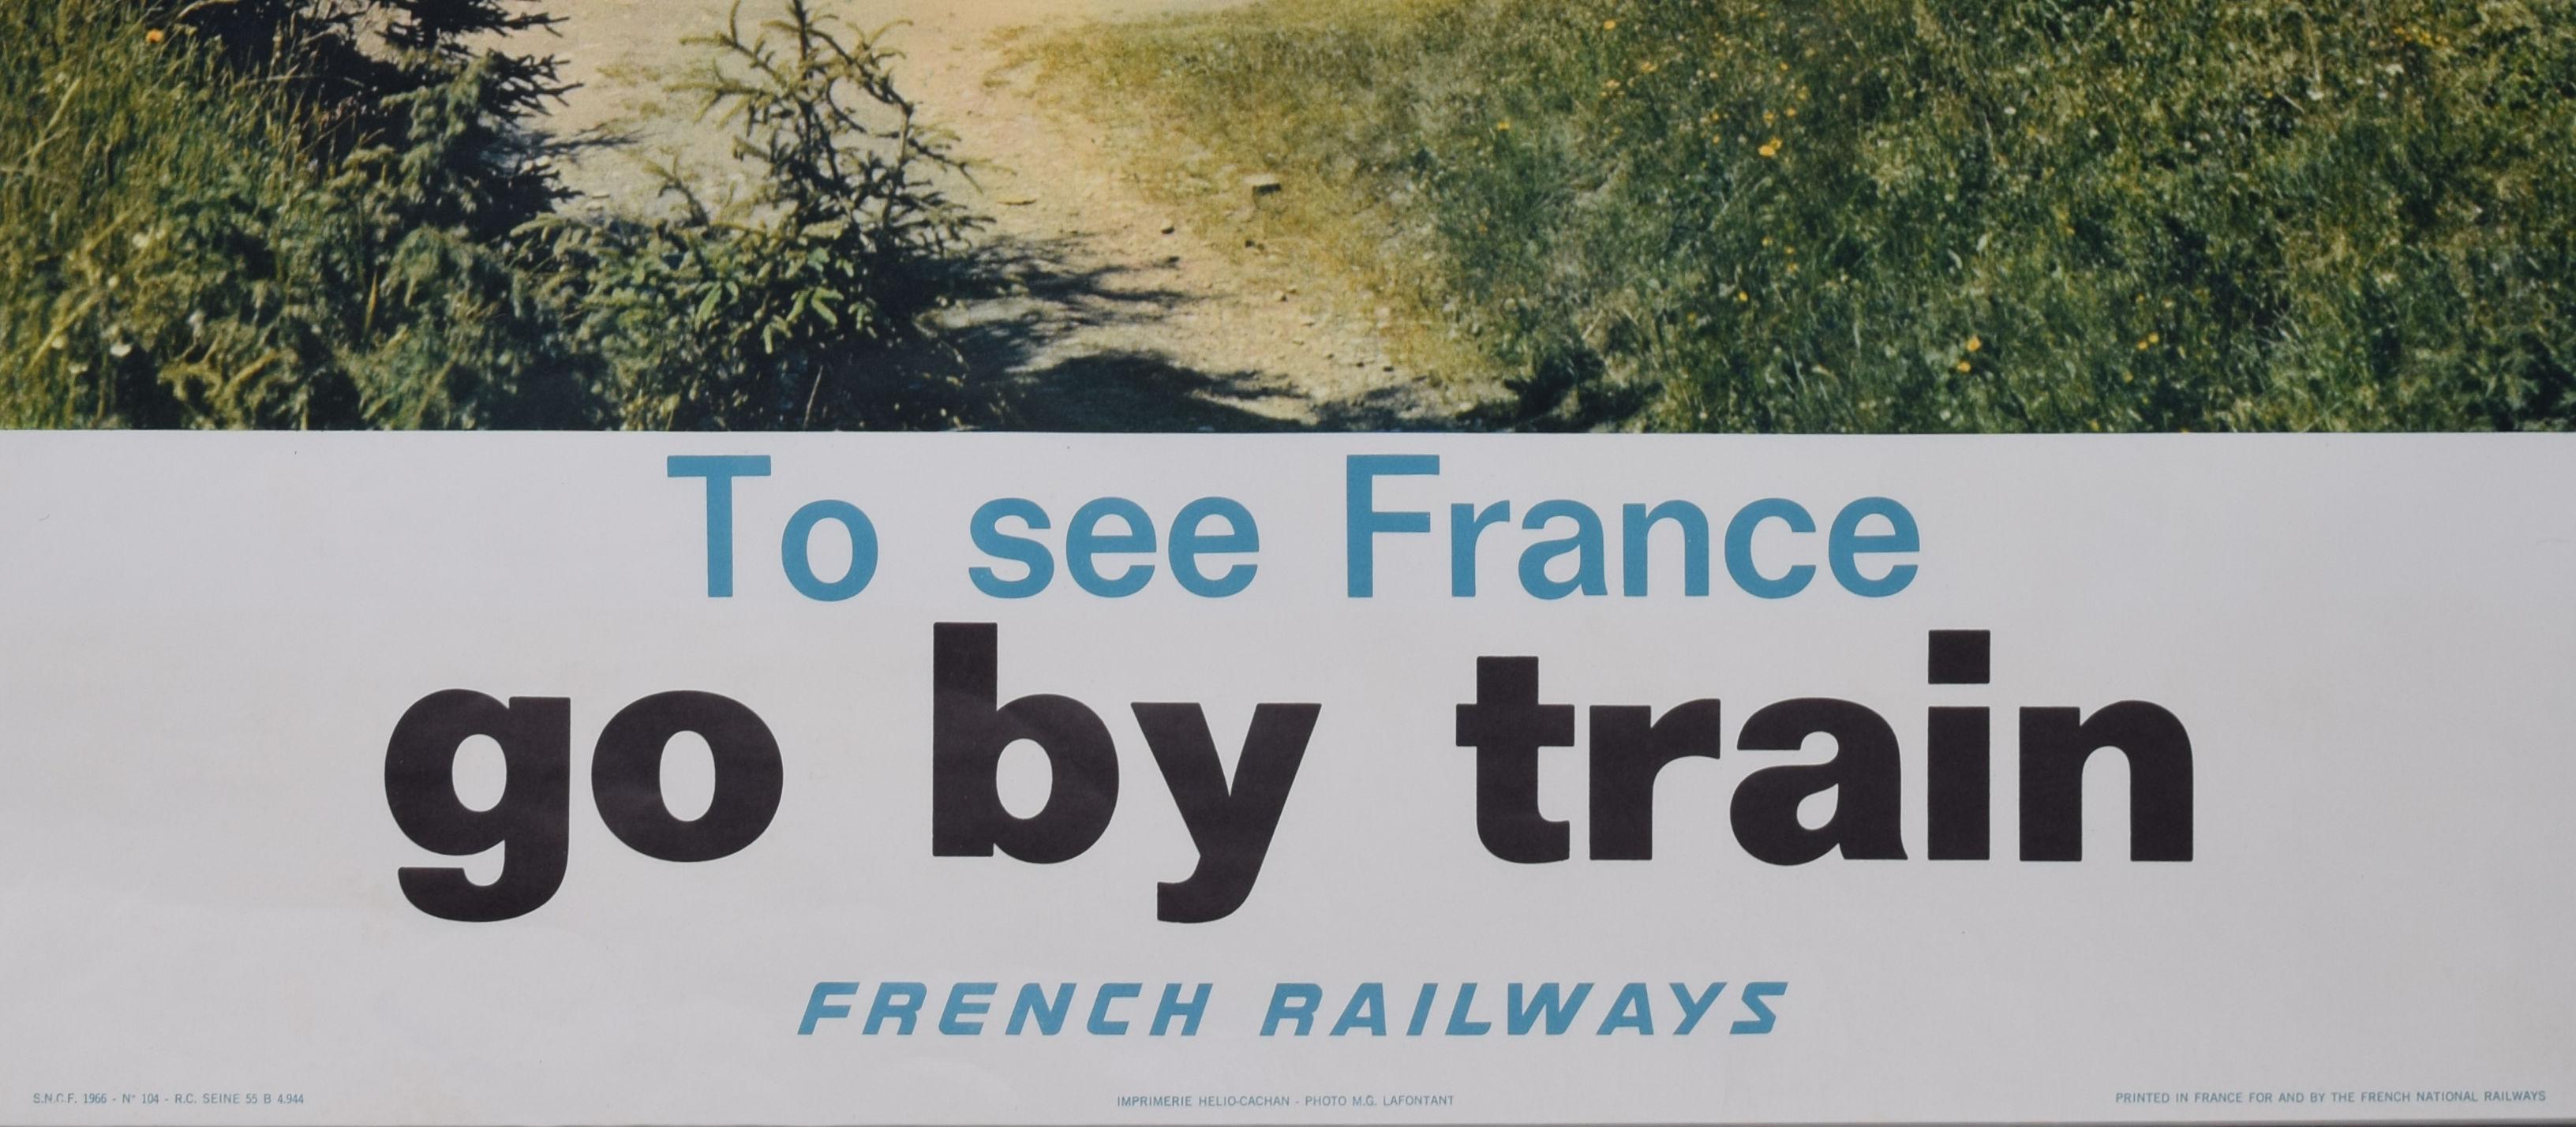 The French Alps - To See France, Go by Train original vintage travel poster For Sale 3